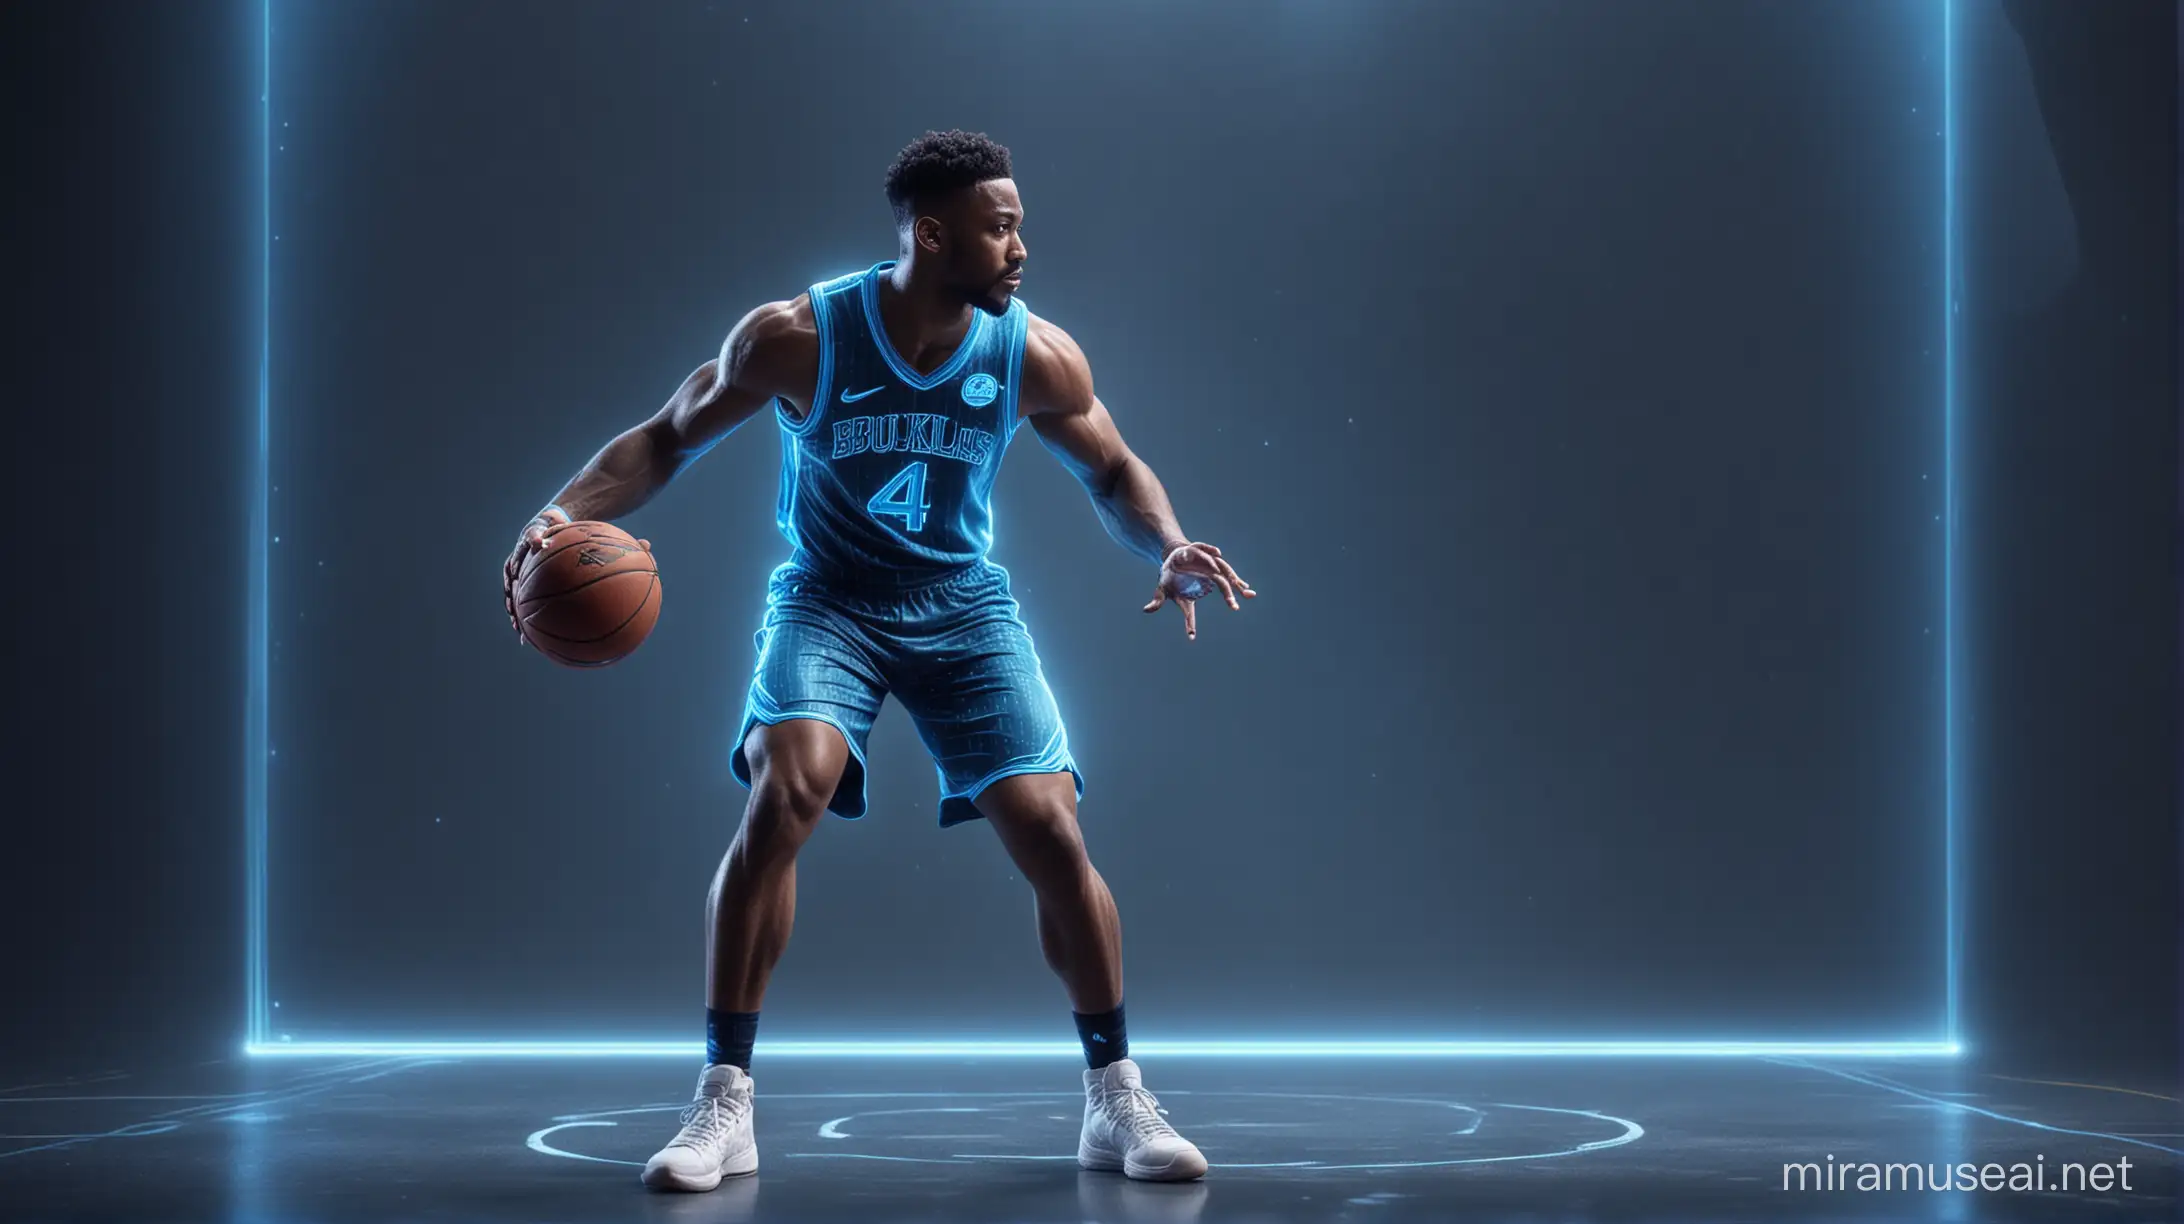 Futuristic Neon Blue Basketball Player Hologram in High Resolution